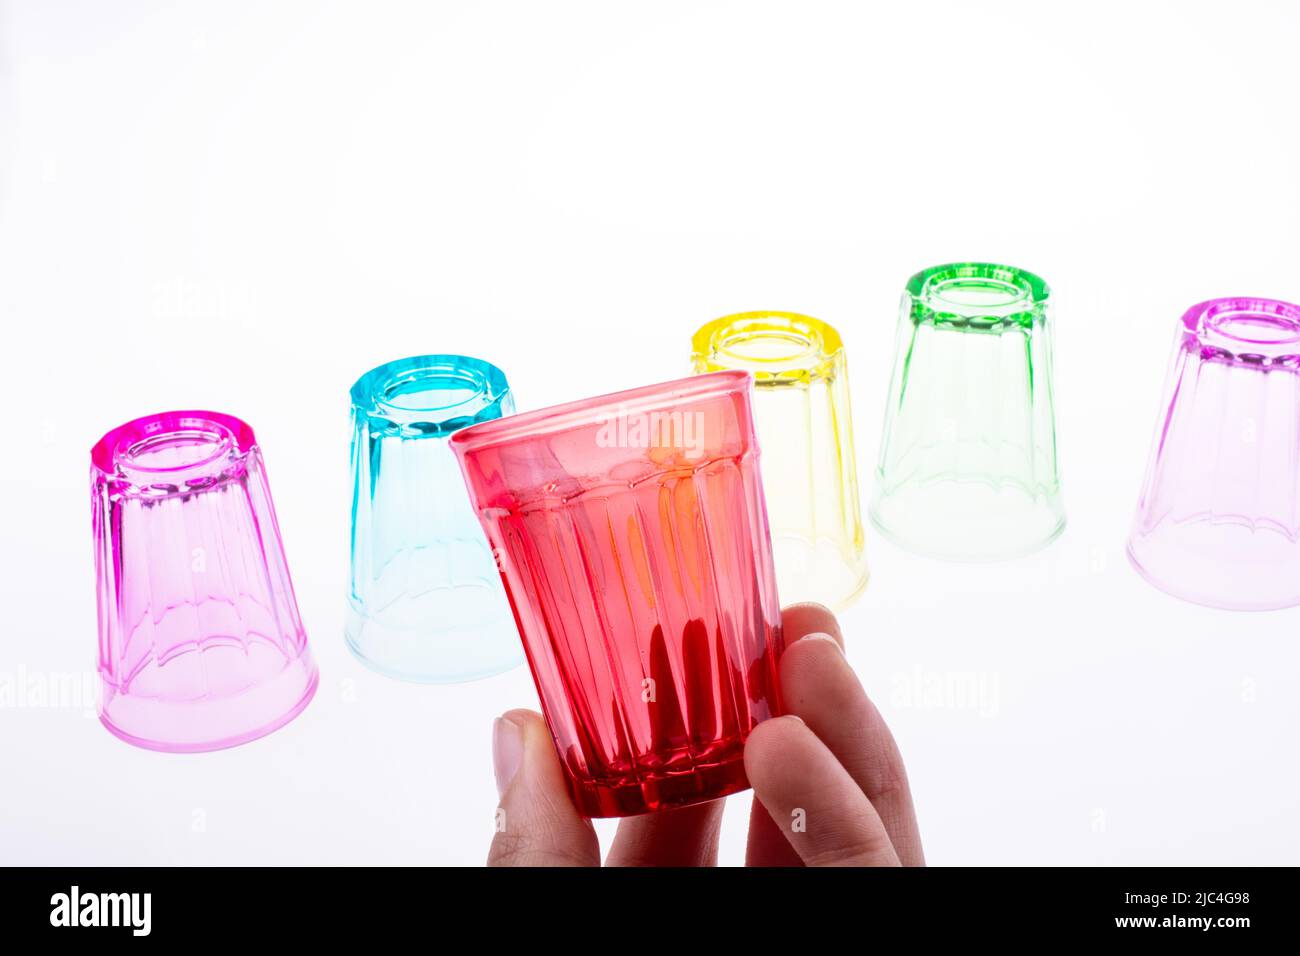 https://c8.alamy.com/comp/2JC4G98/colorful-drinking-glass-in-hand-with-glasses-on-white-background-2JC4G98.jpg